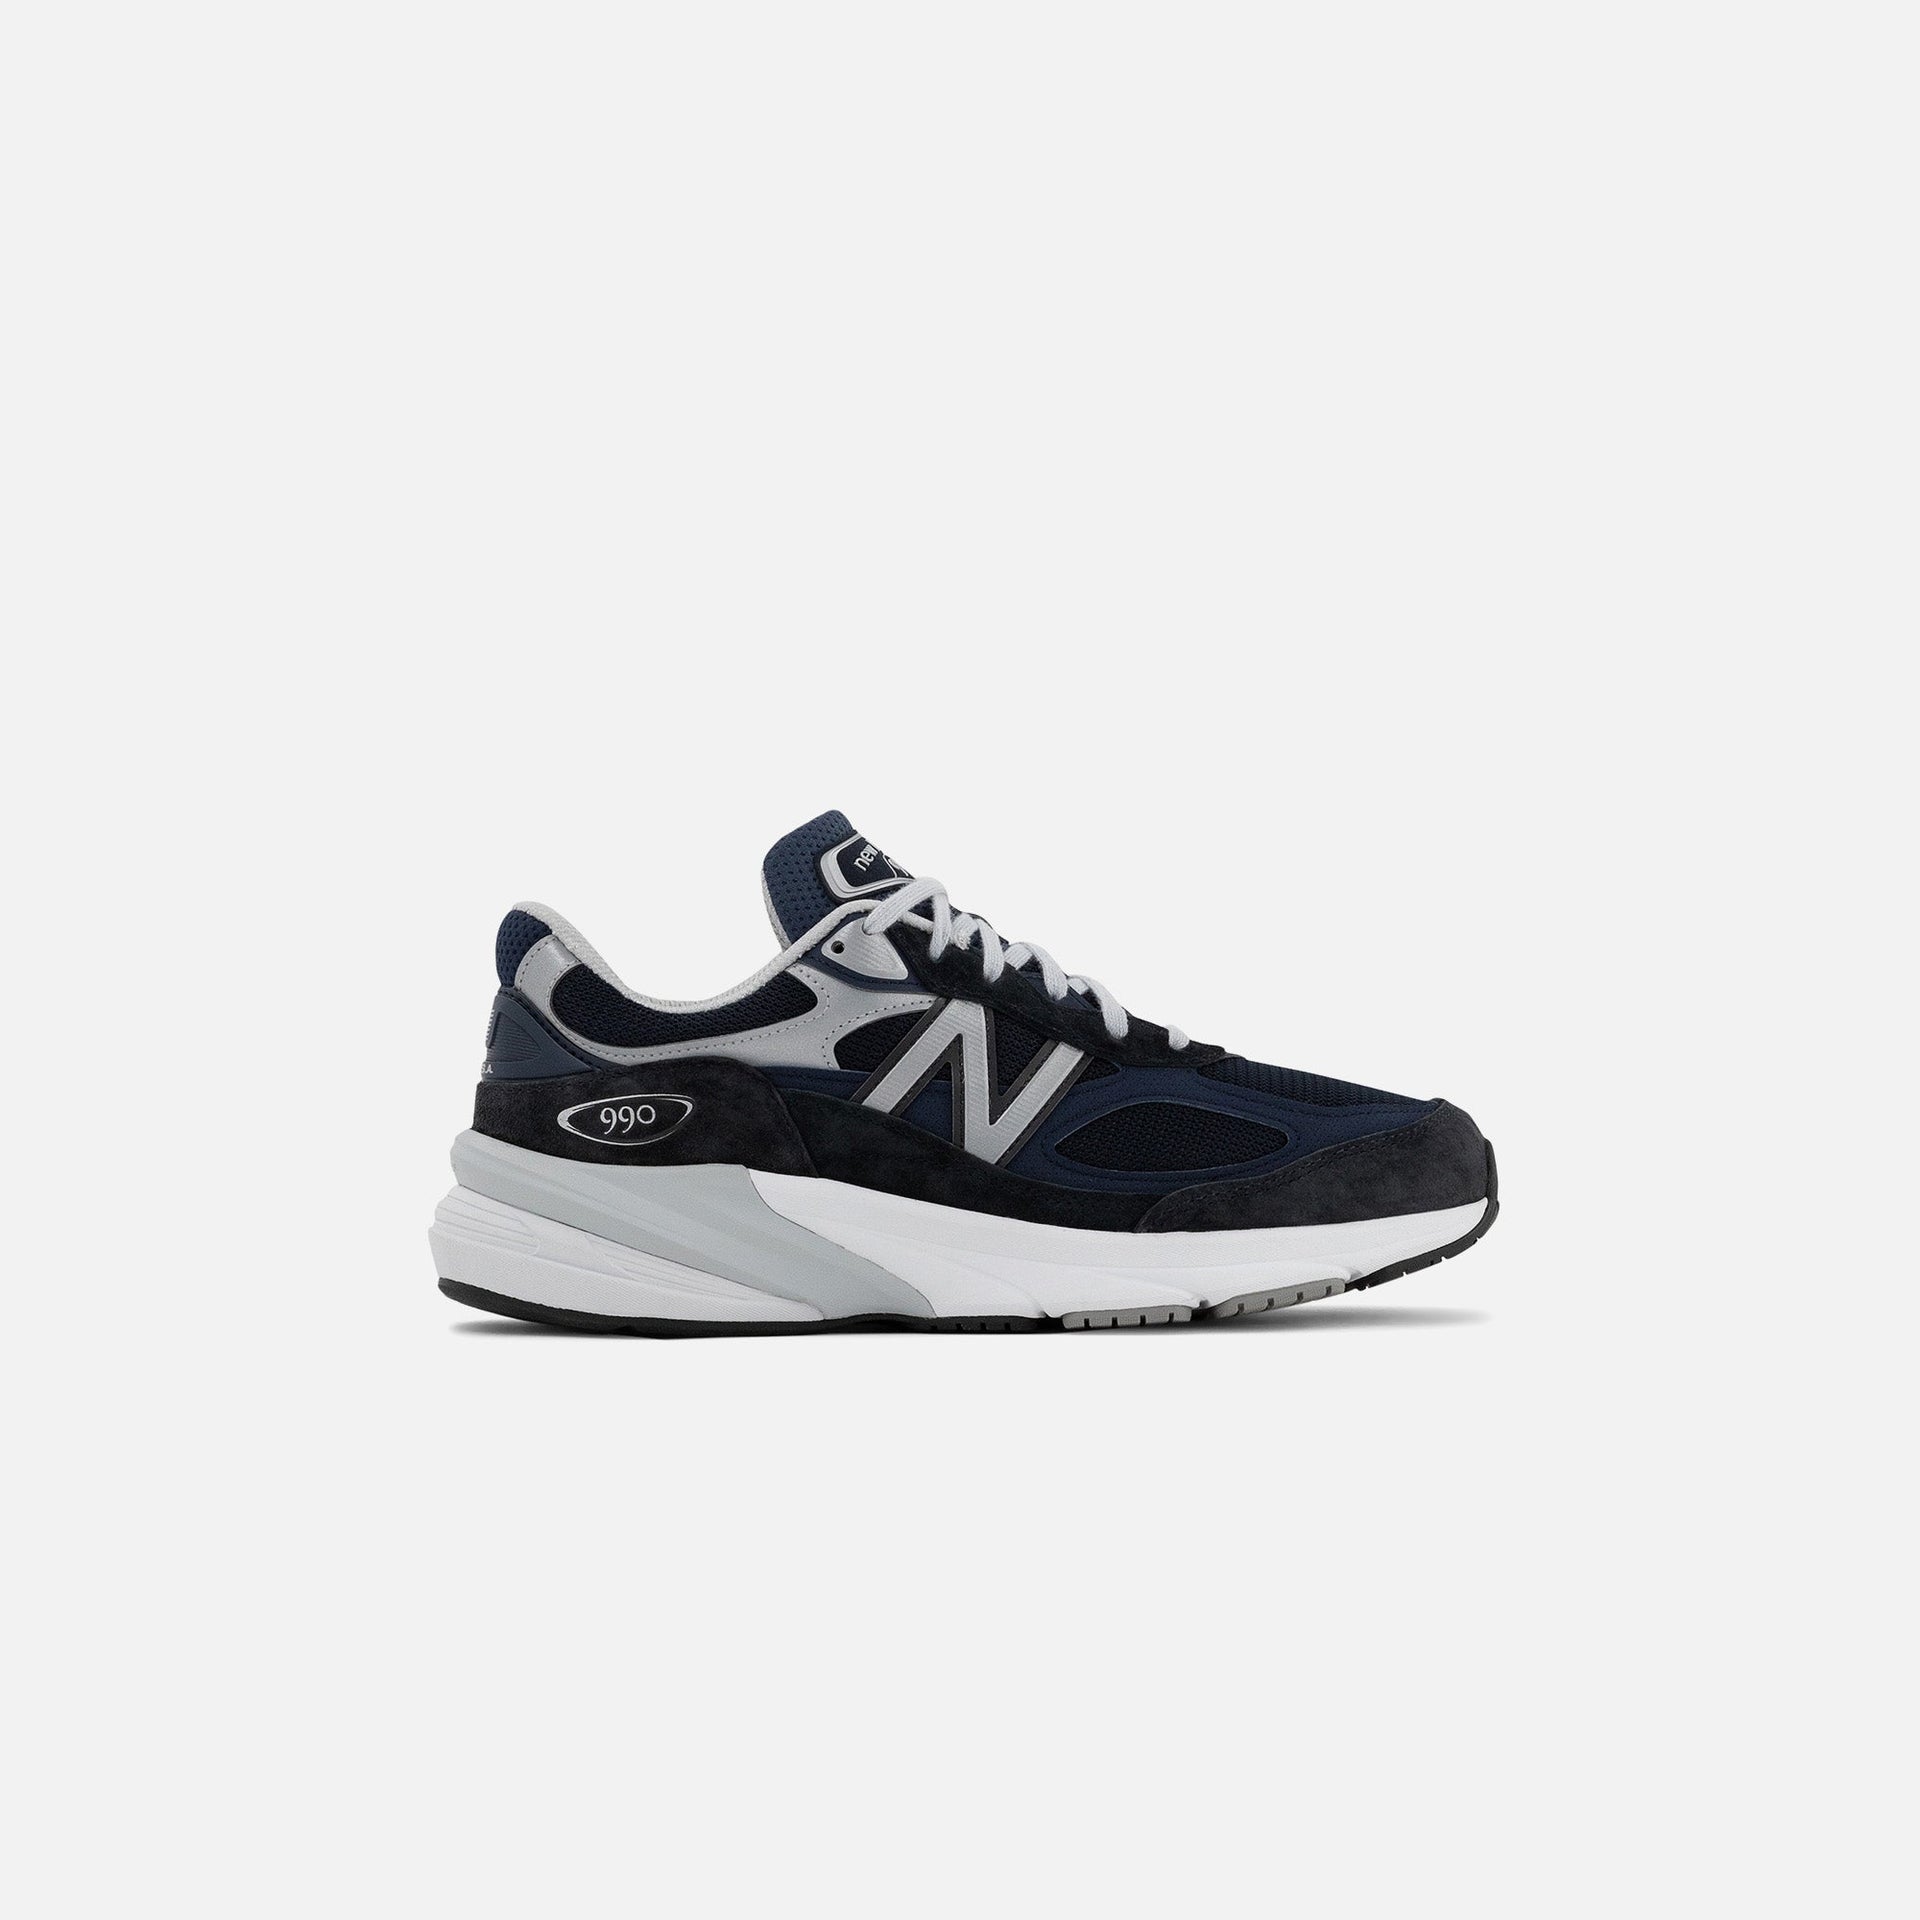 New Balance WMNS Made in USA 990v6 - Navy